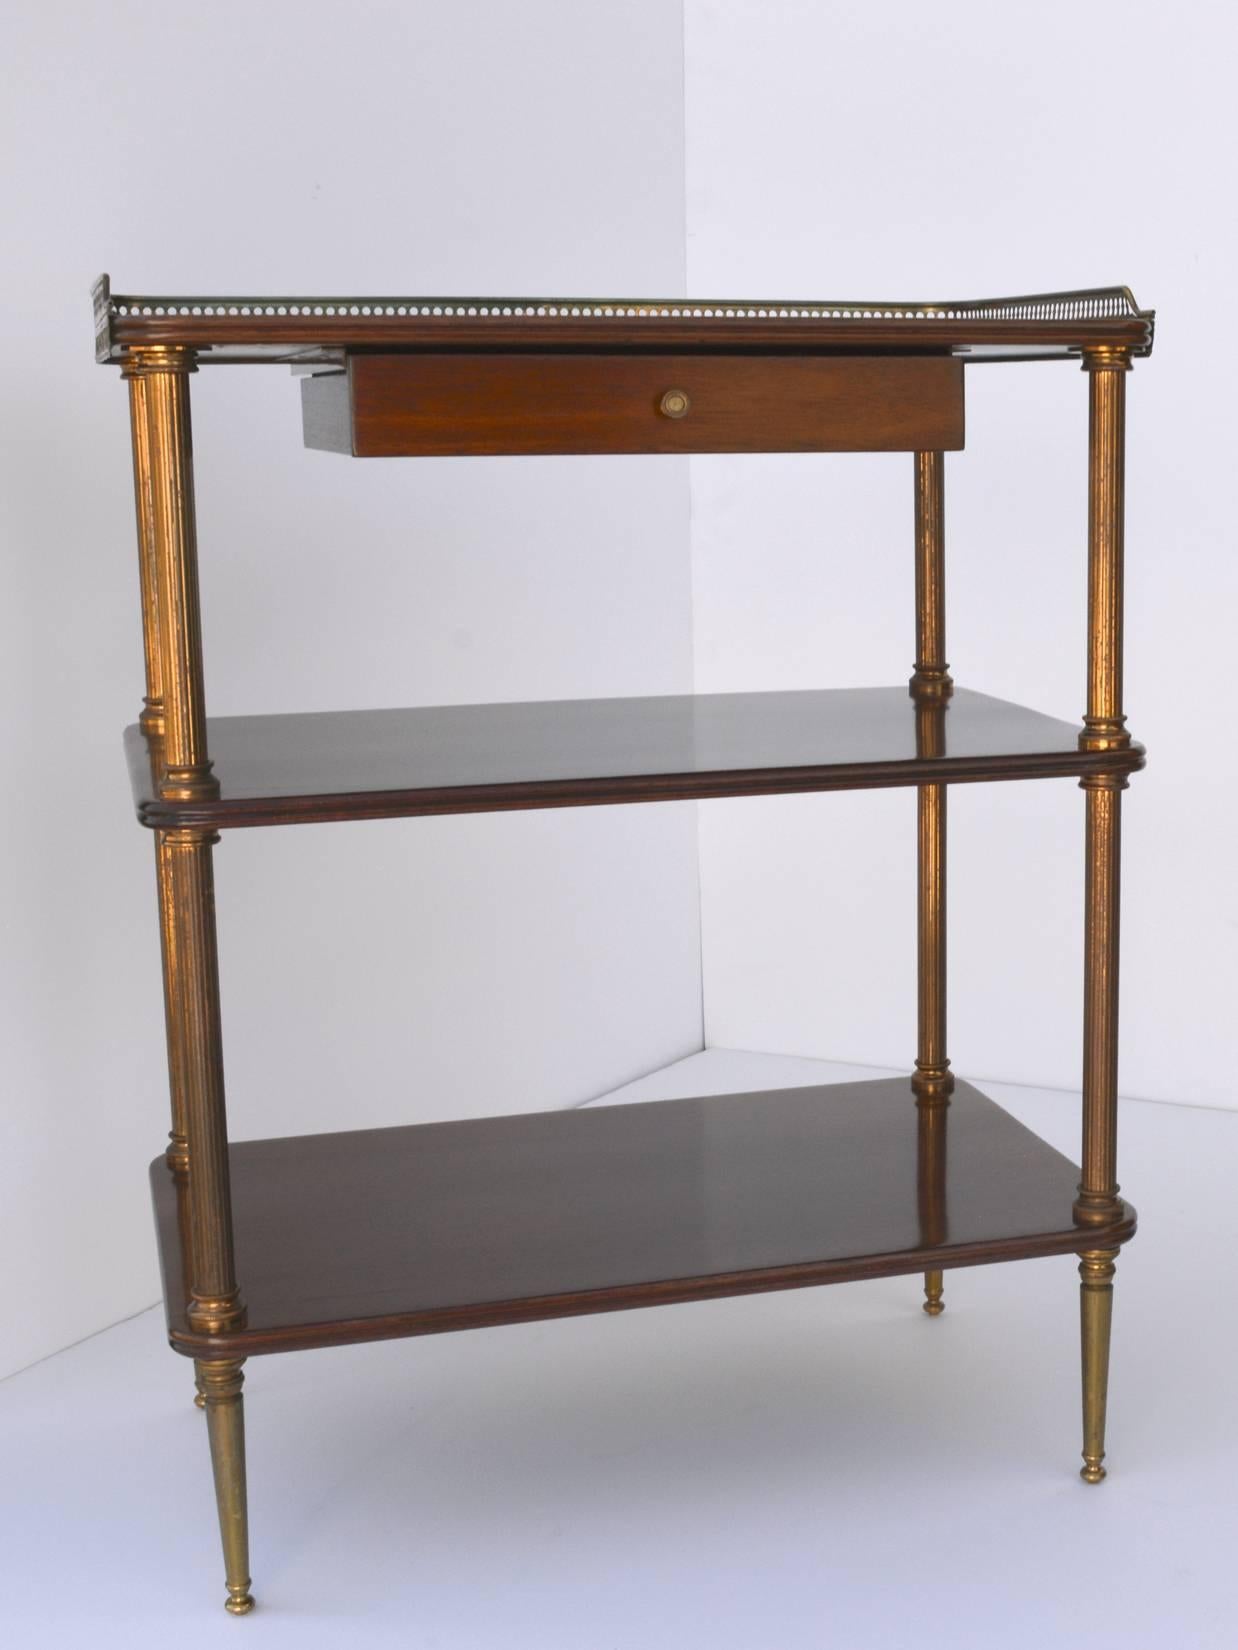 A fine pair of Mid-Century French neoclassical side tables, with three mahogany shelves supported on fluted brass columns with decorative capitals, resting on tapered brass legs. The top has a three sided pierced brass gallery and a small drawer